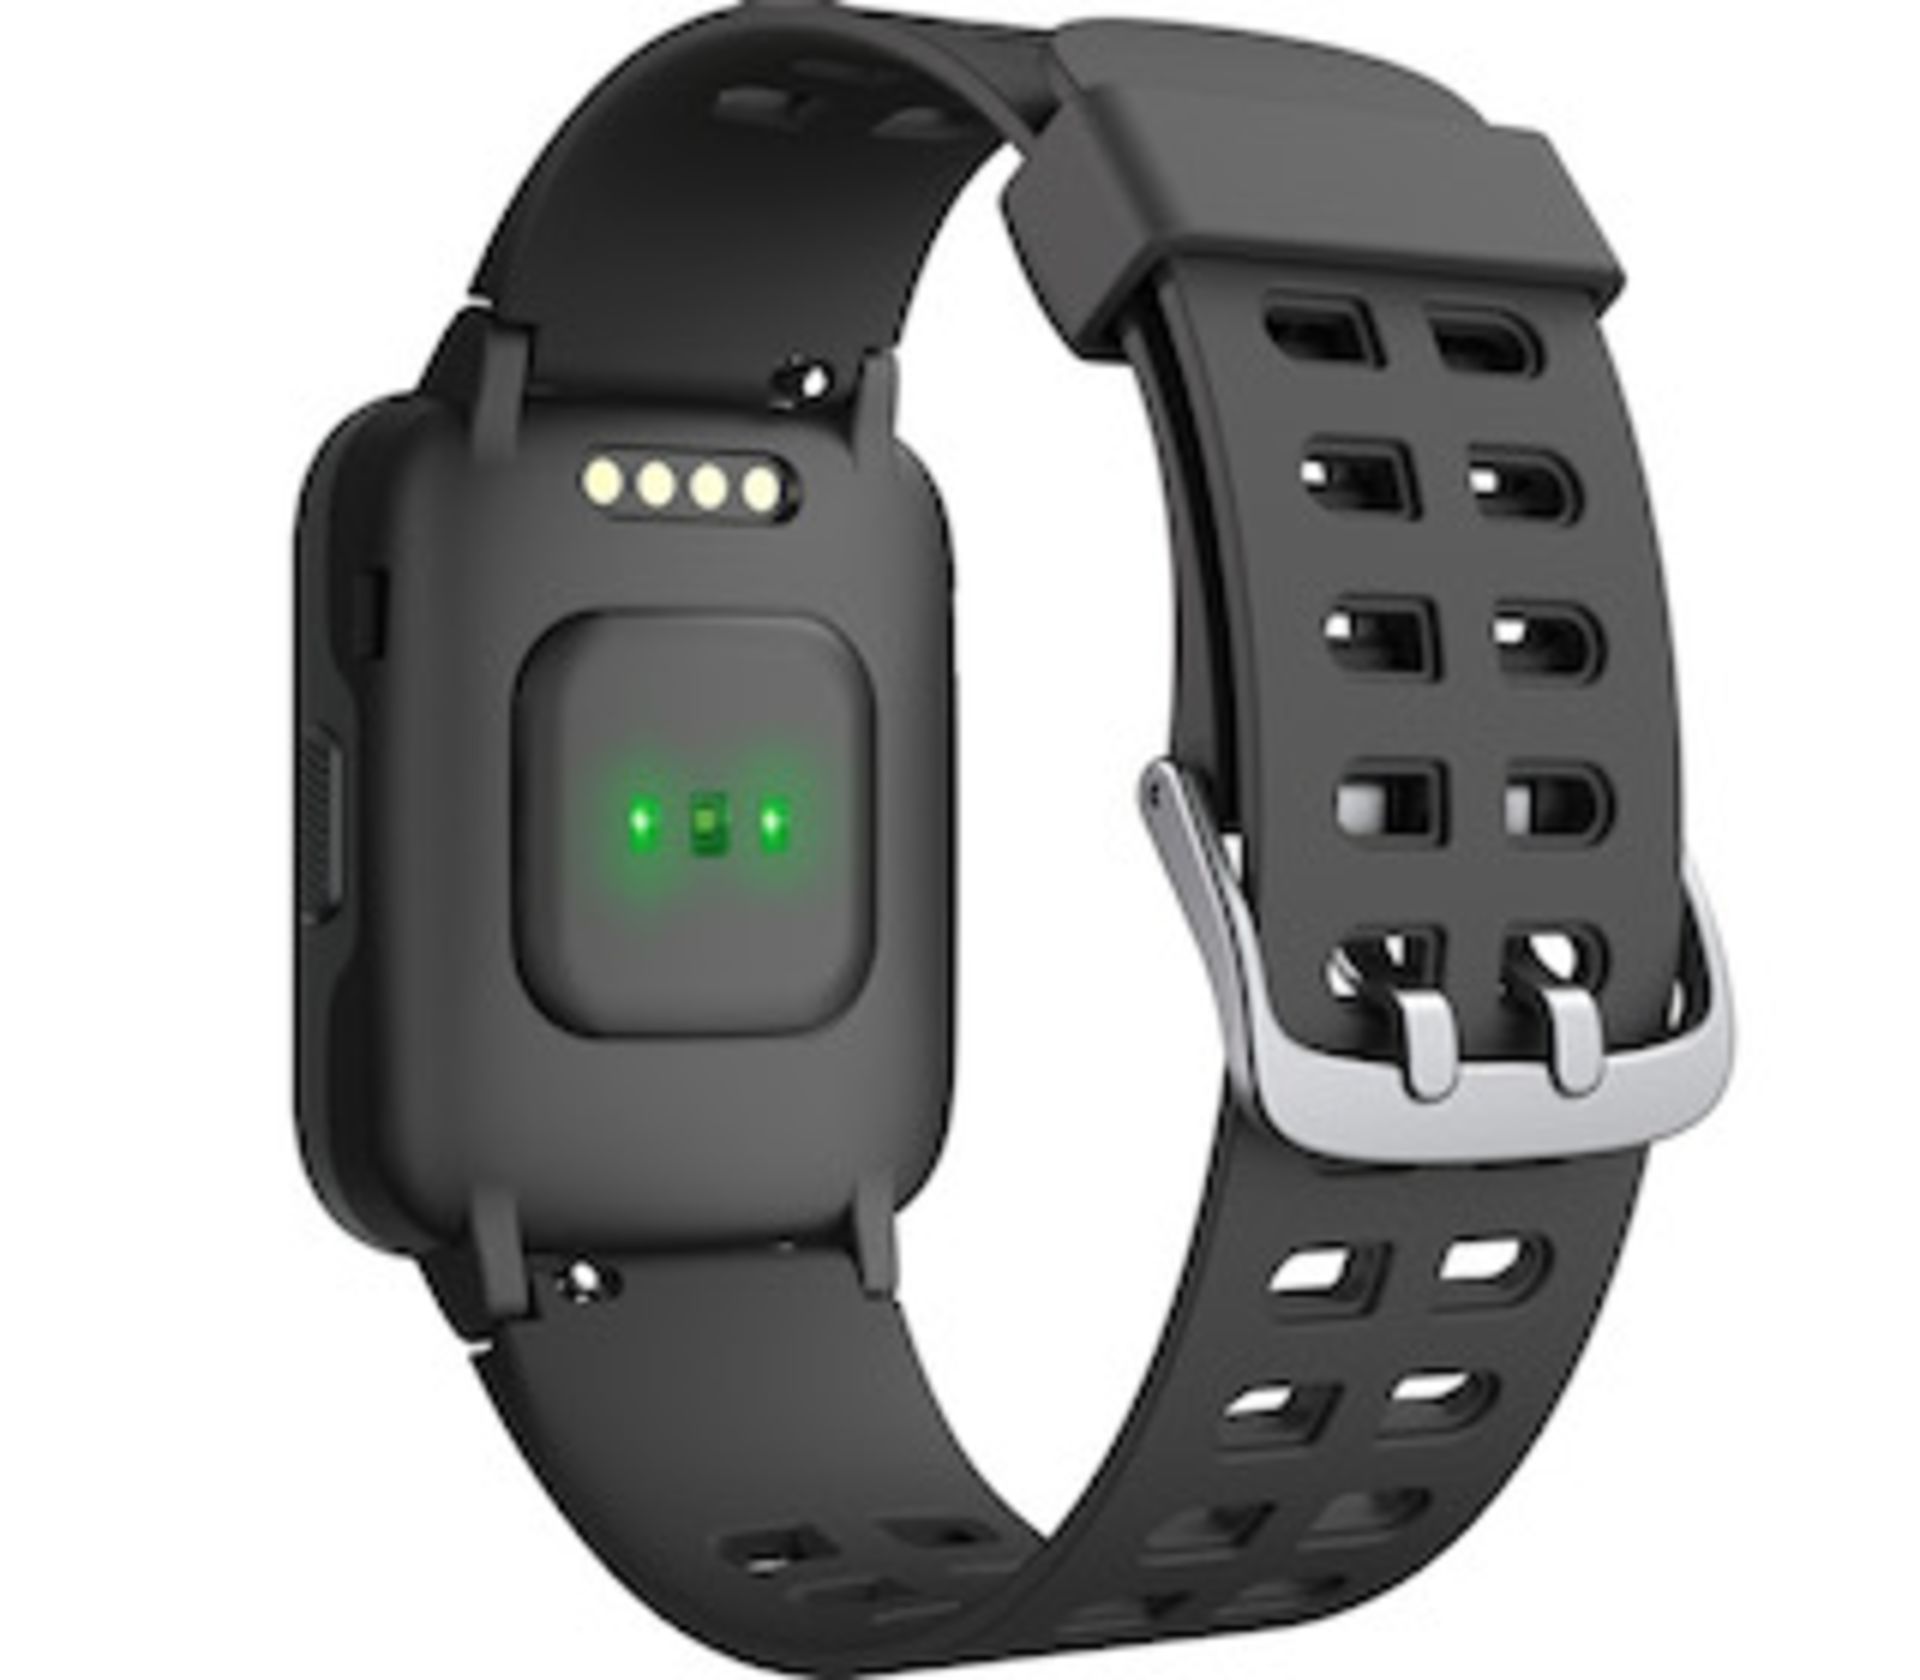 Brand New Unisex Fitness Tracker Watch Id205 Black Strap About This Item 1.3-Inch LCD Colour - Image 12 of 30